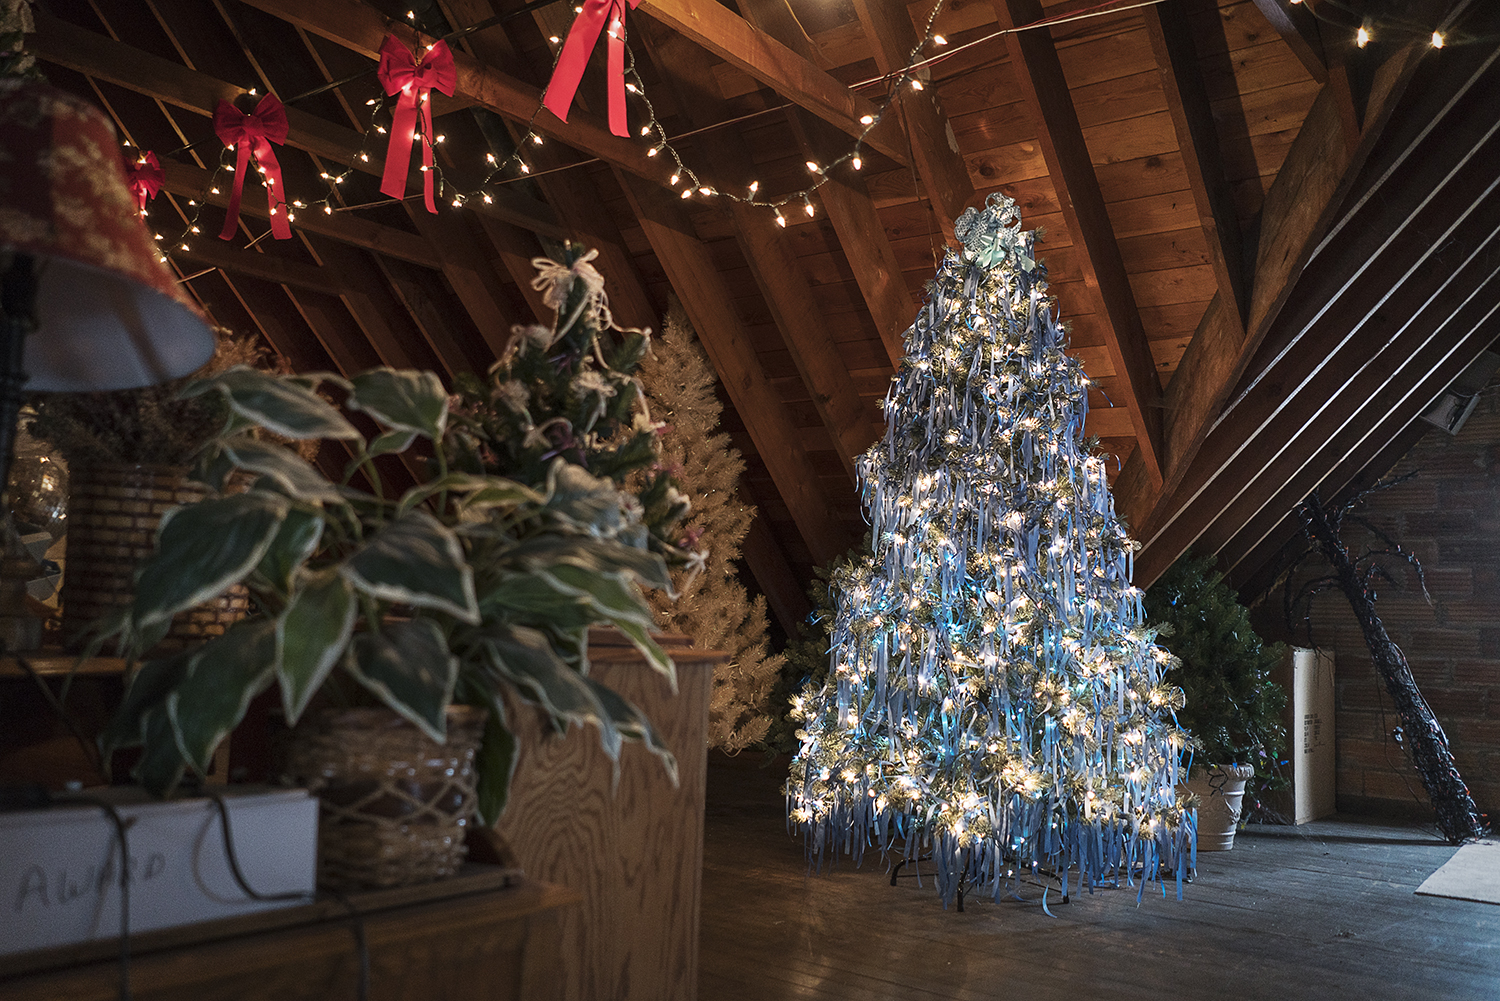 A tree adorned with 2,000 blue ribbons is illuminated in the attic of the Heddy home. Each ribbon on the tree represents a reported case of child abuse in the county for the year it was decorated. Each year the Heddy's generate, on average, $15,000 t